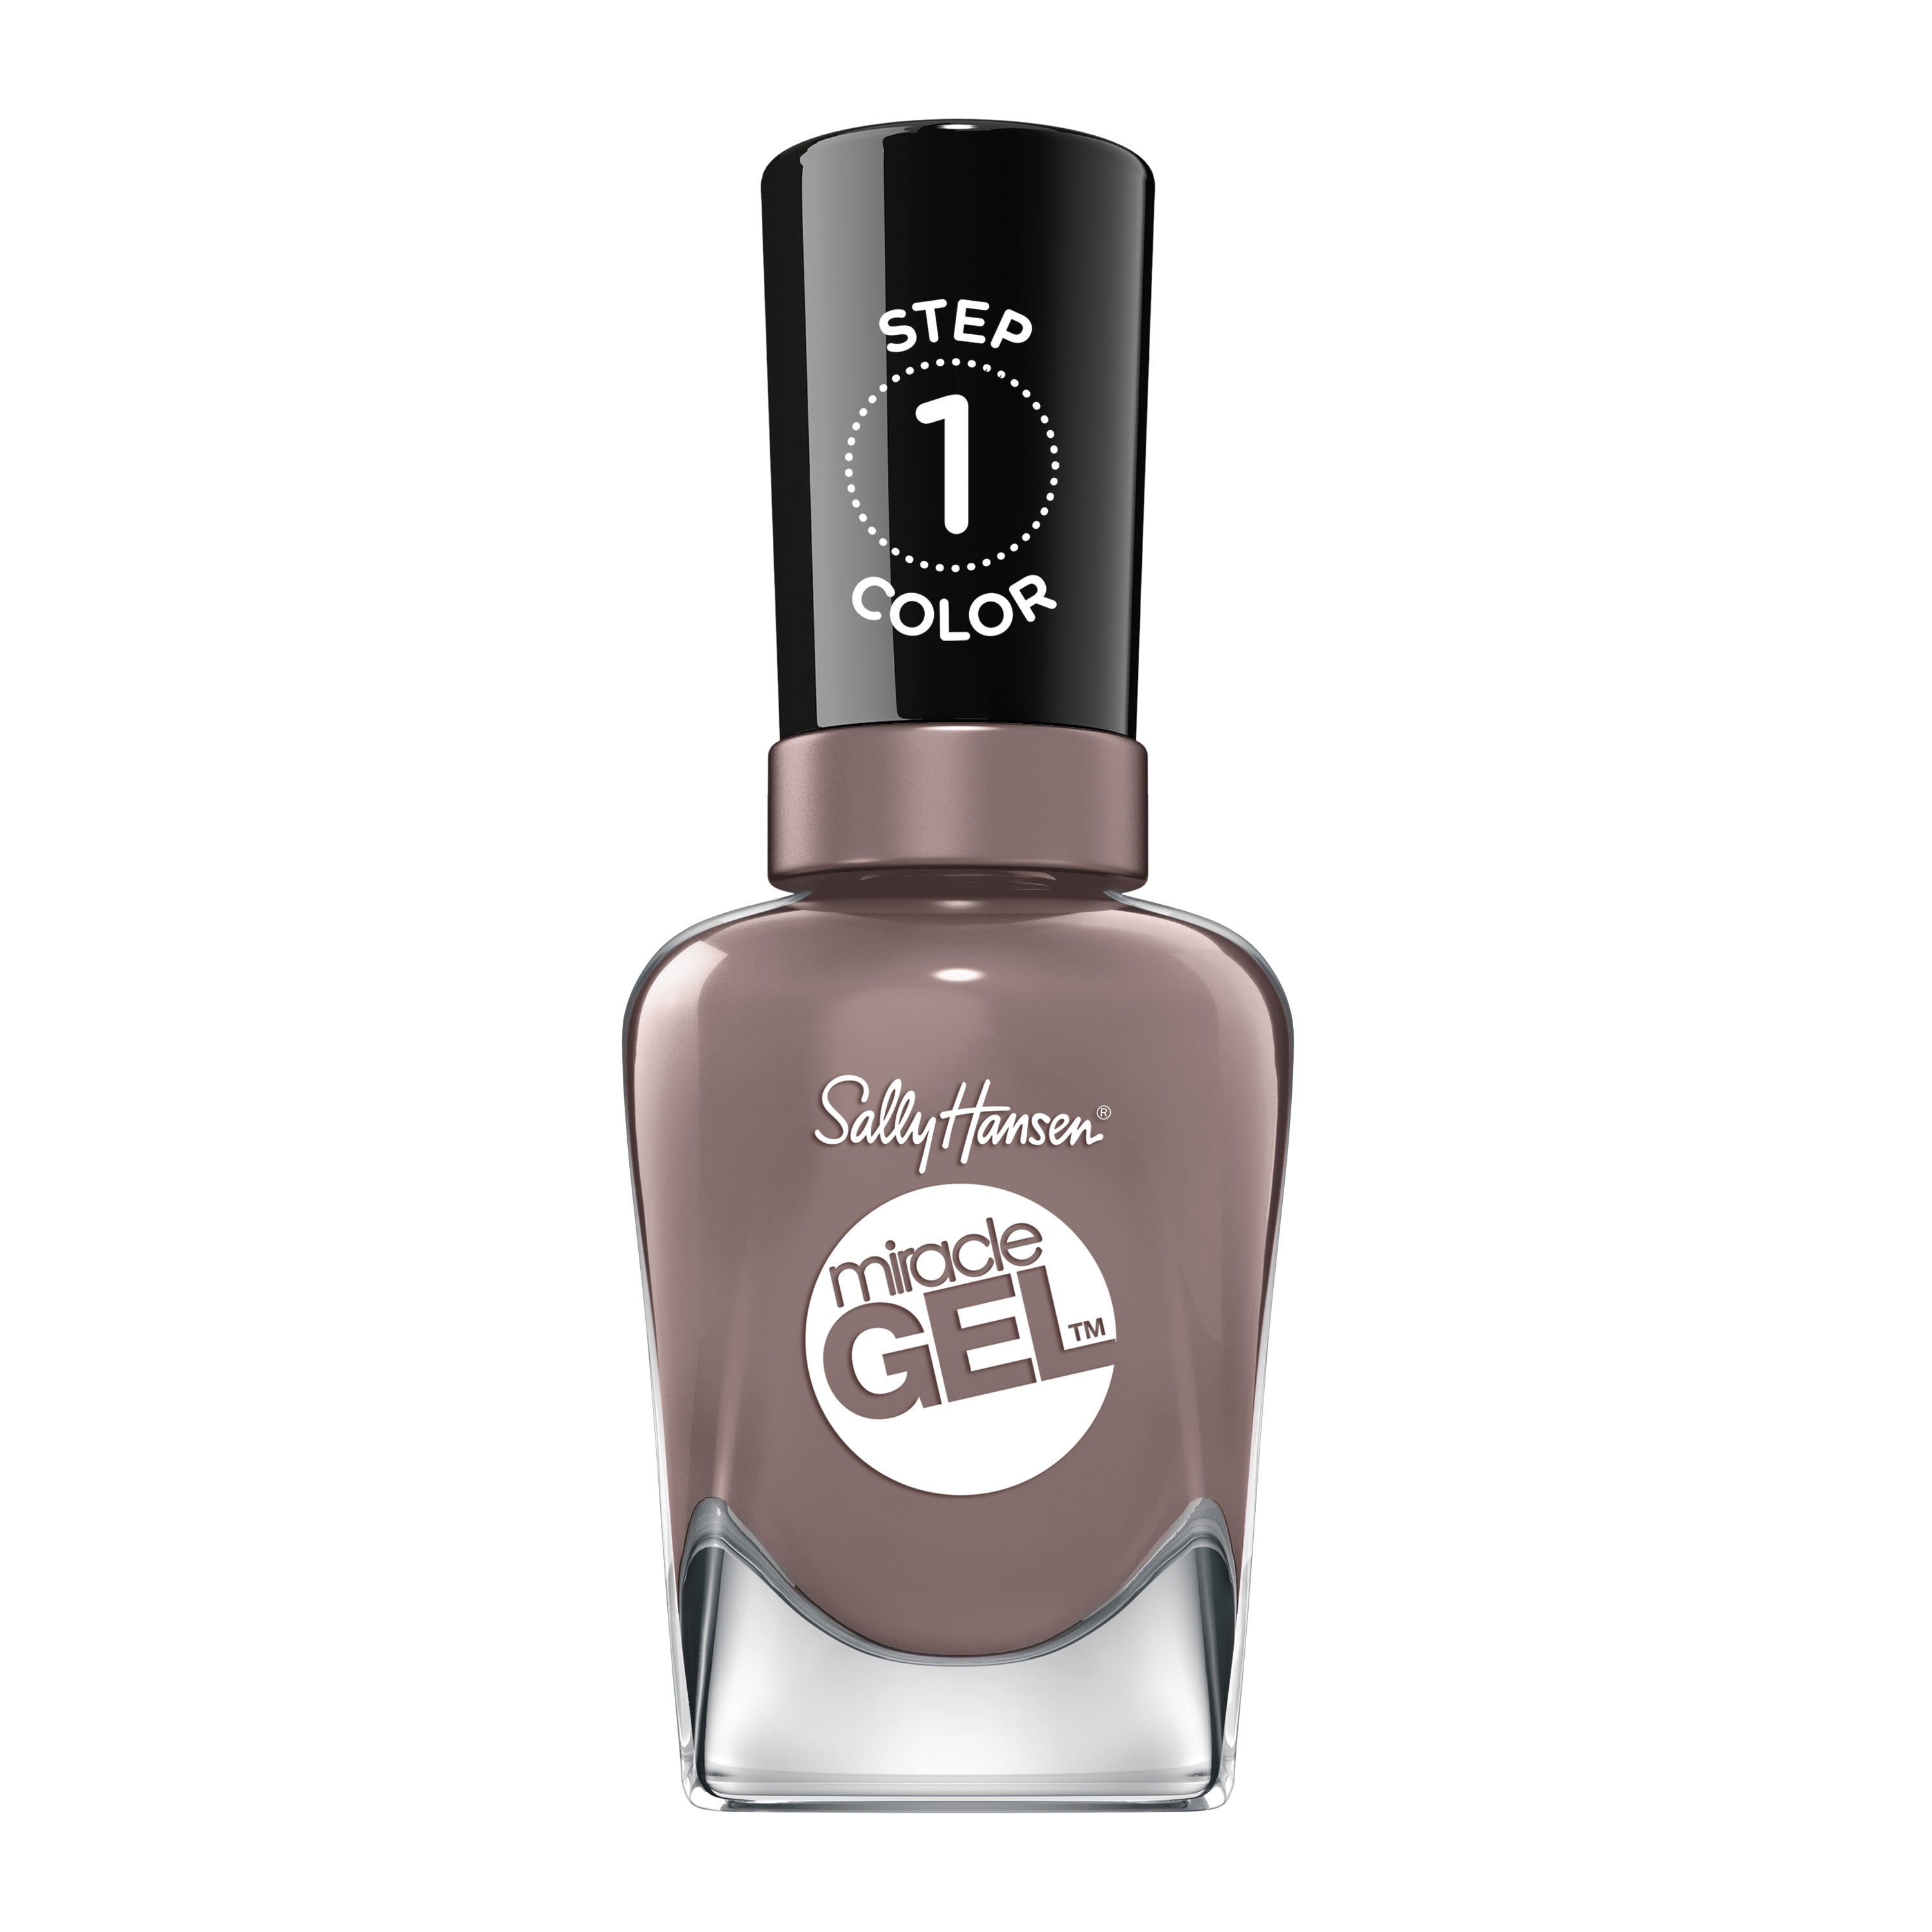 Sally Hansen Miracle Gel Nail Color, to the Taupe, 0.5 oz, At Home Gel Nail Polish, Gel Nail Polish, No UV Lamp Needed, Long Lasting, Chip Resistant